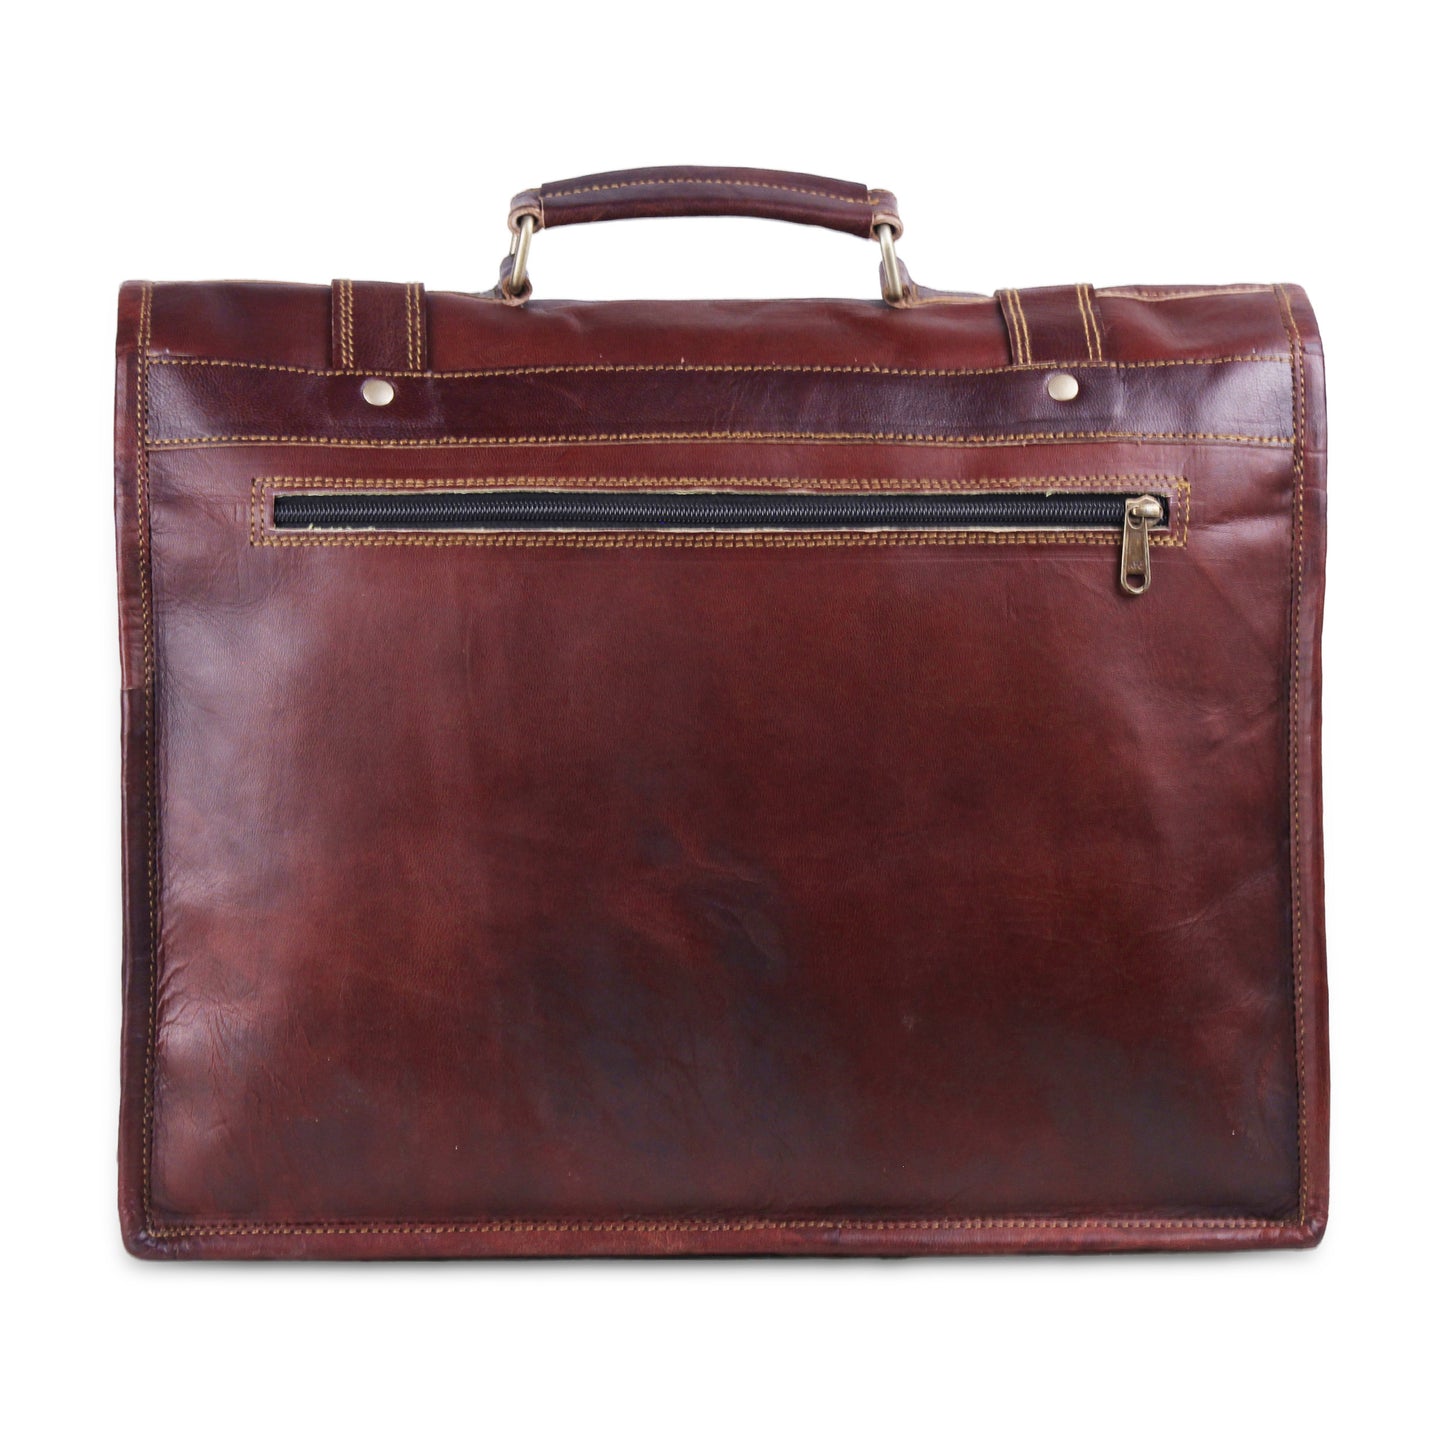 Top Handle Brown Leather Messenger Bag 15 inch